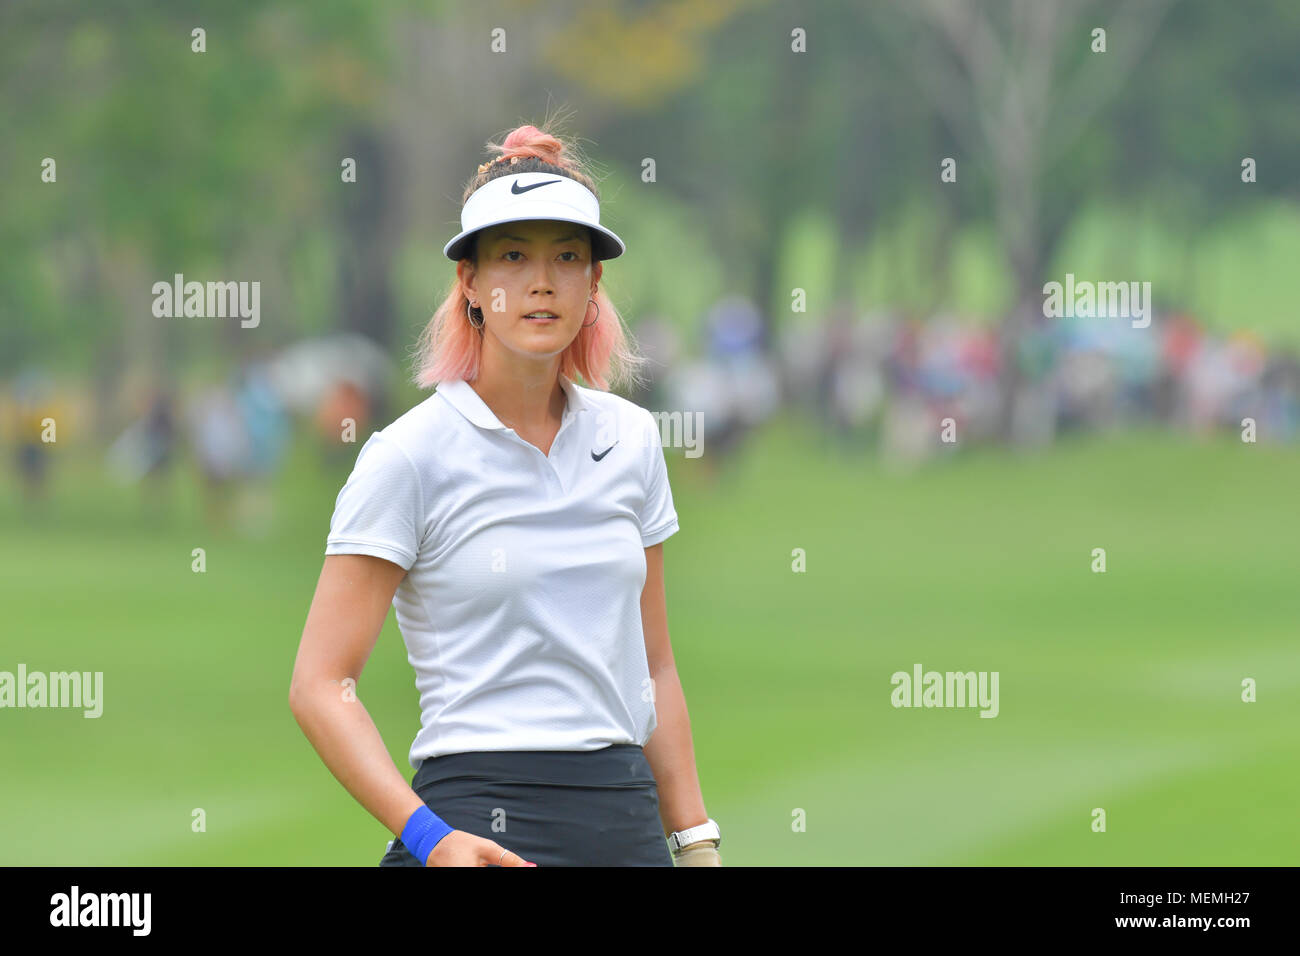 Michelle Wie of USA in Honda LPGA Thailand 2018 at Siam Country Club, Old Course on February 24, 2018 in Pattaya Chonburi, Thailand. Stock Photo